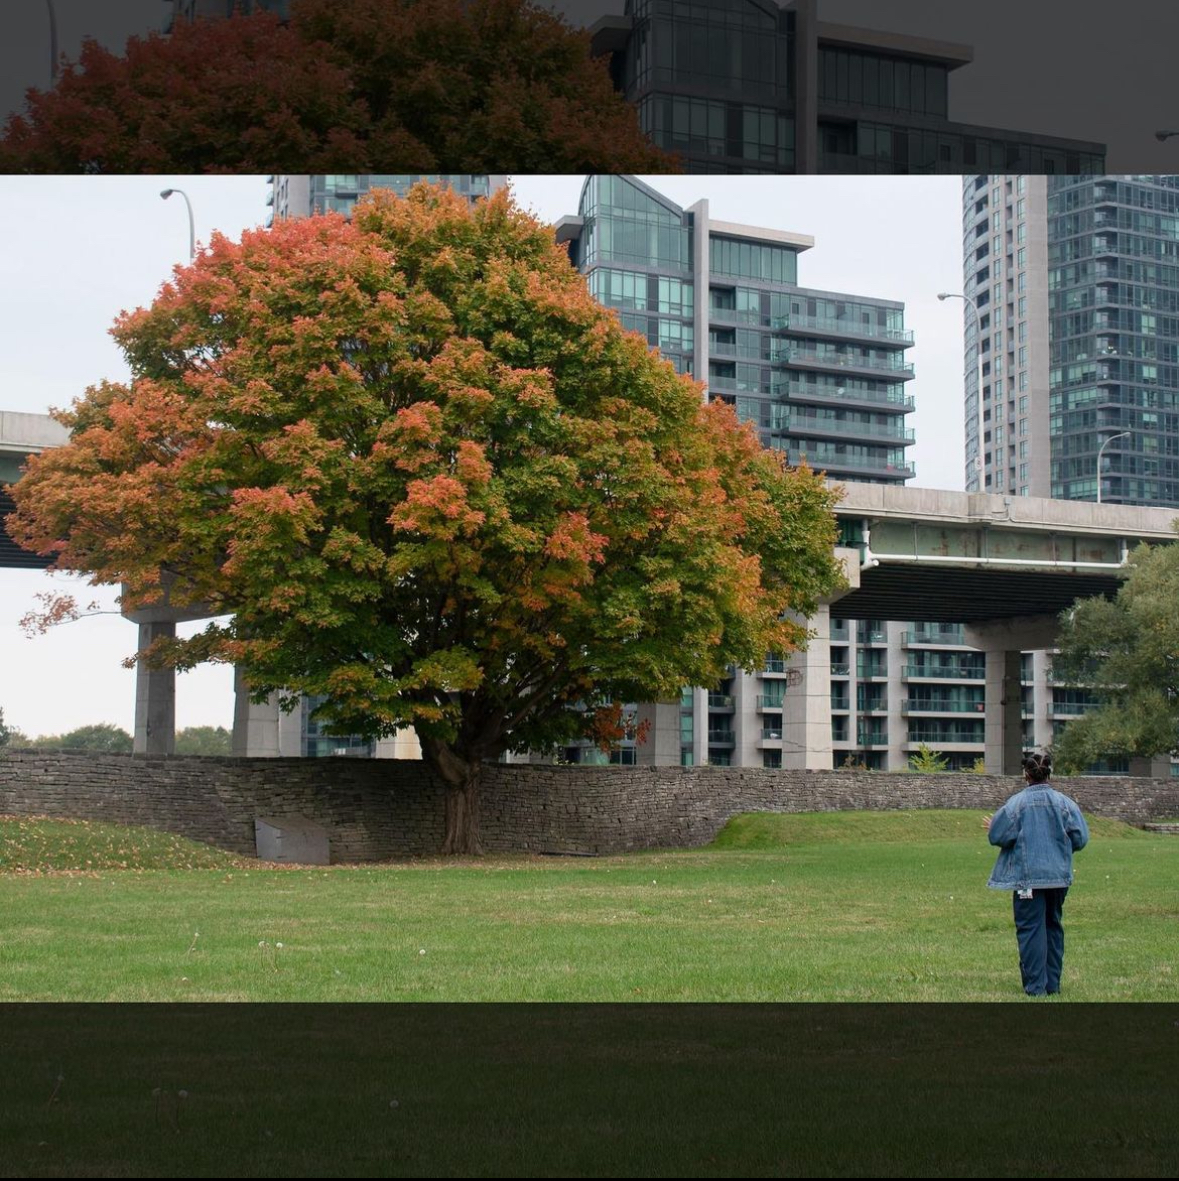 A photo of a large field with a massive and beautiful tree with the leaves turning colour. A black woman in a denim jacket walks towards it.